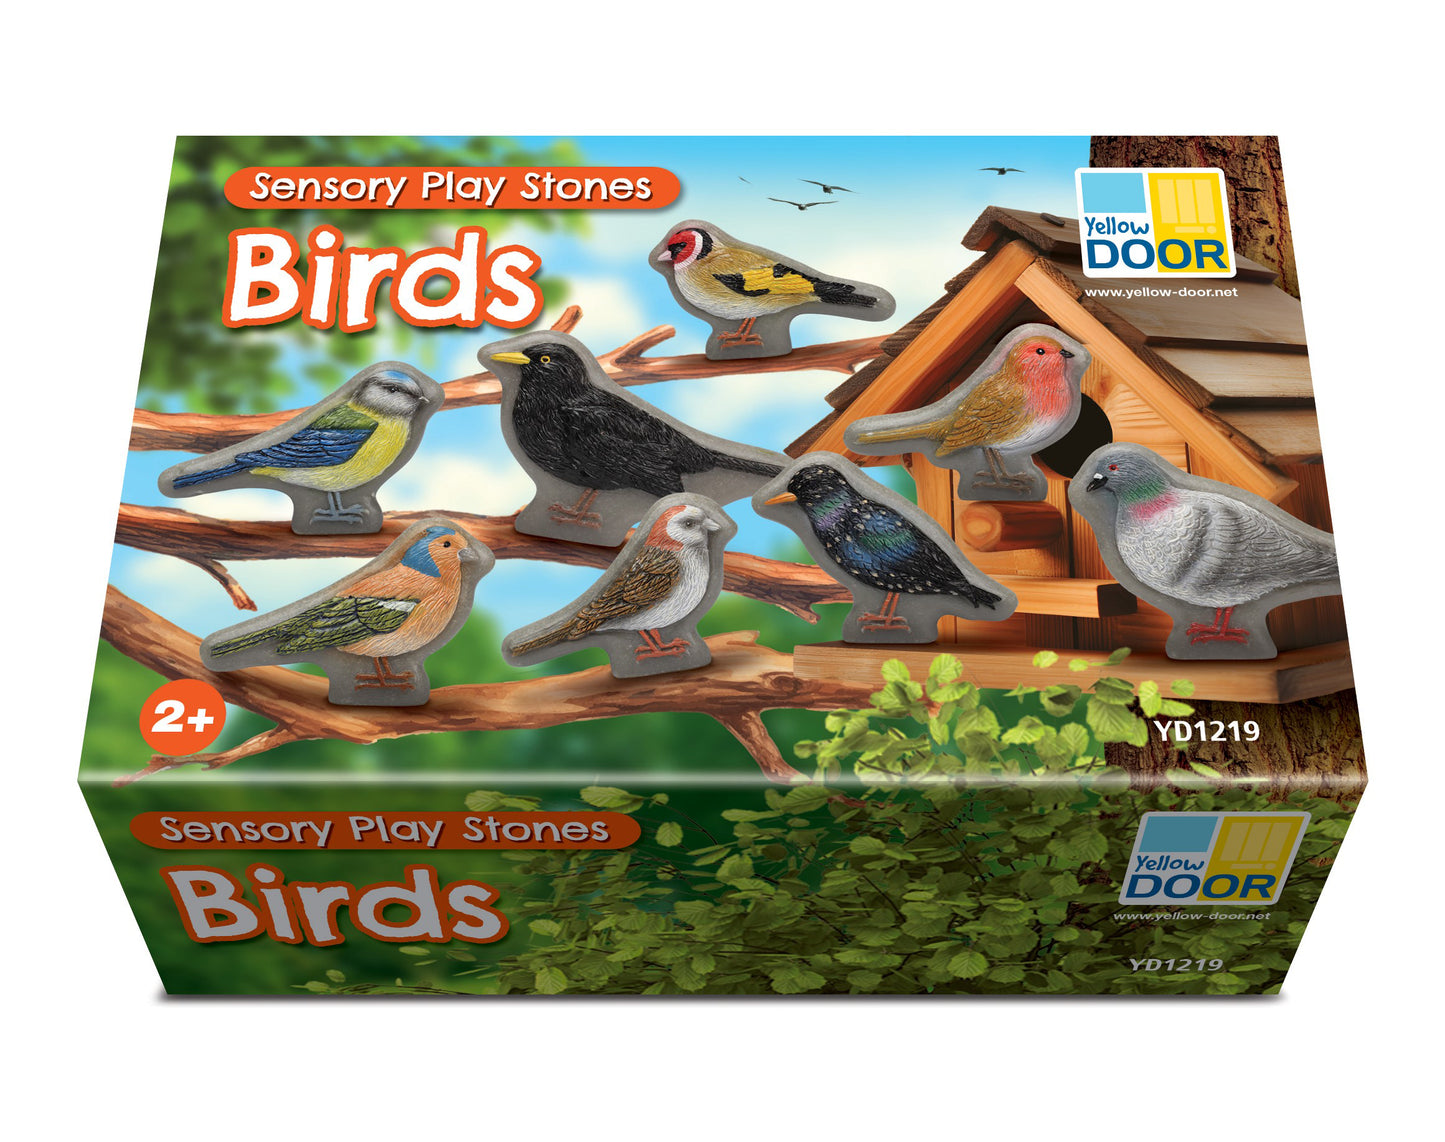 Play birds - NEW pre order only